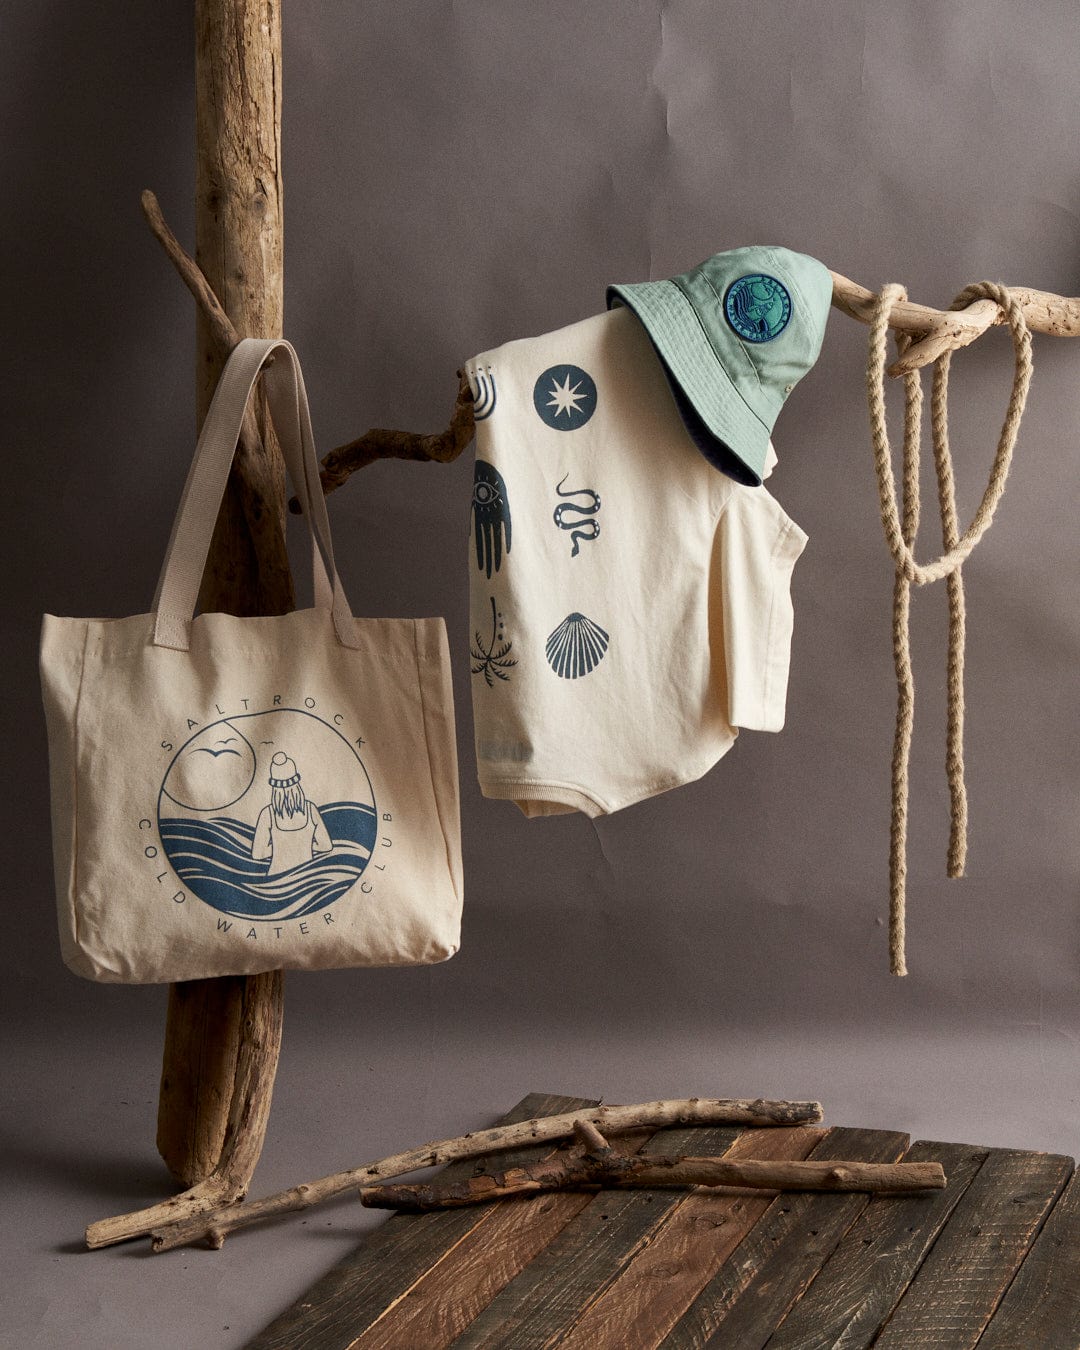 Eco-friendly apparel and accessories with marine-inspired designs, including Cold Water Club recycled shopper bags in cream color, displayed on a rustic wooden stand by Saltrock.